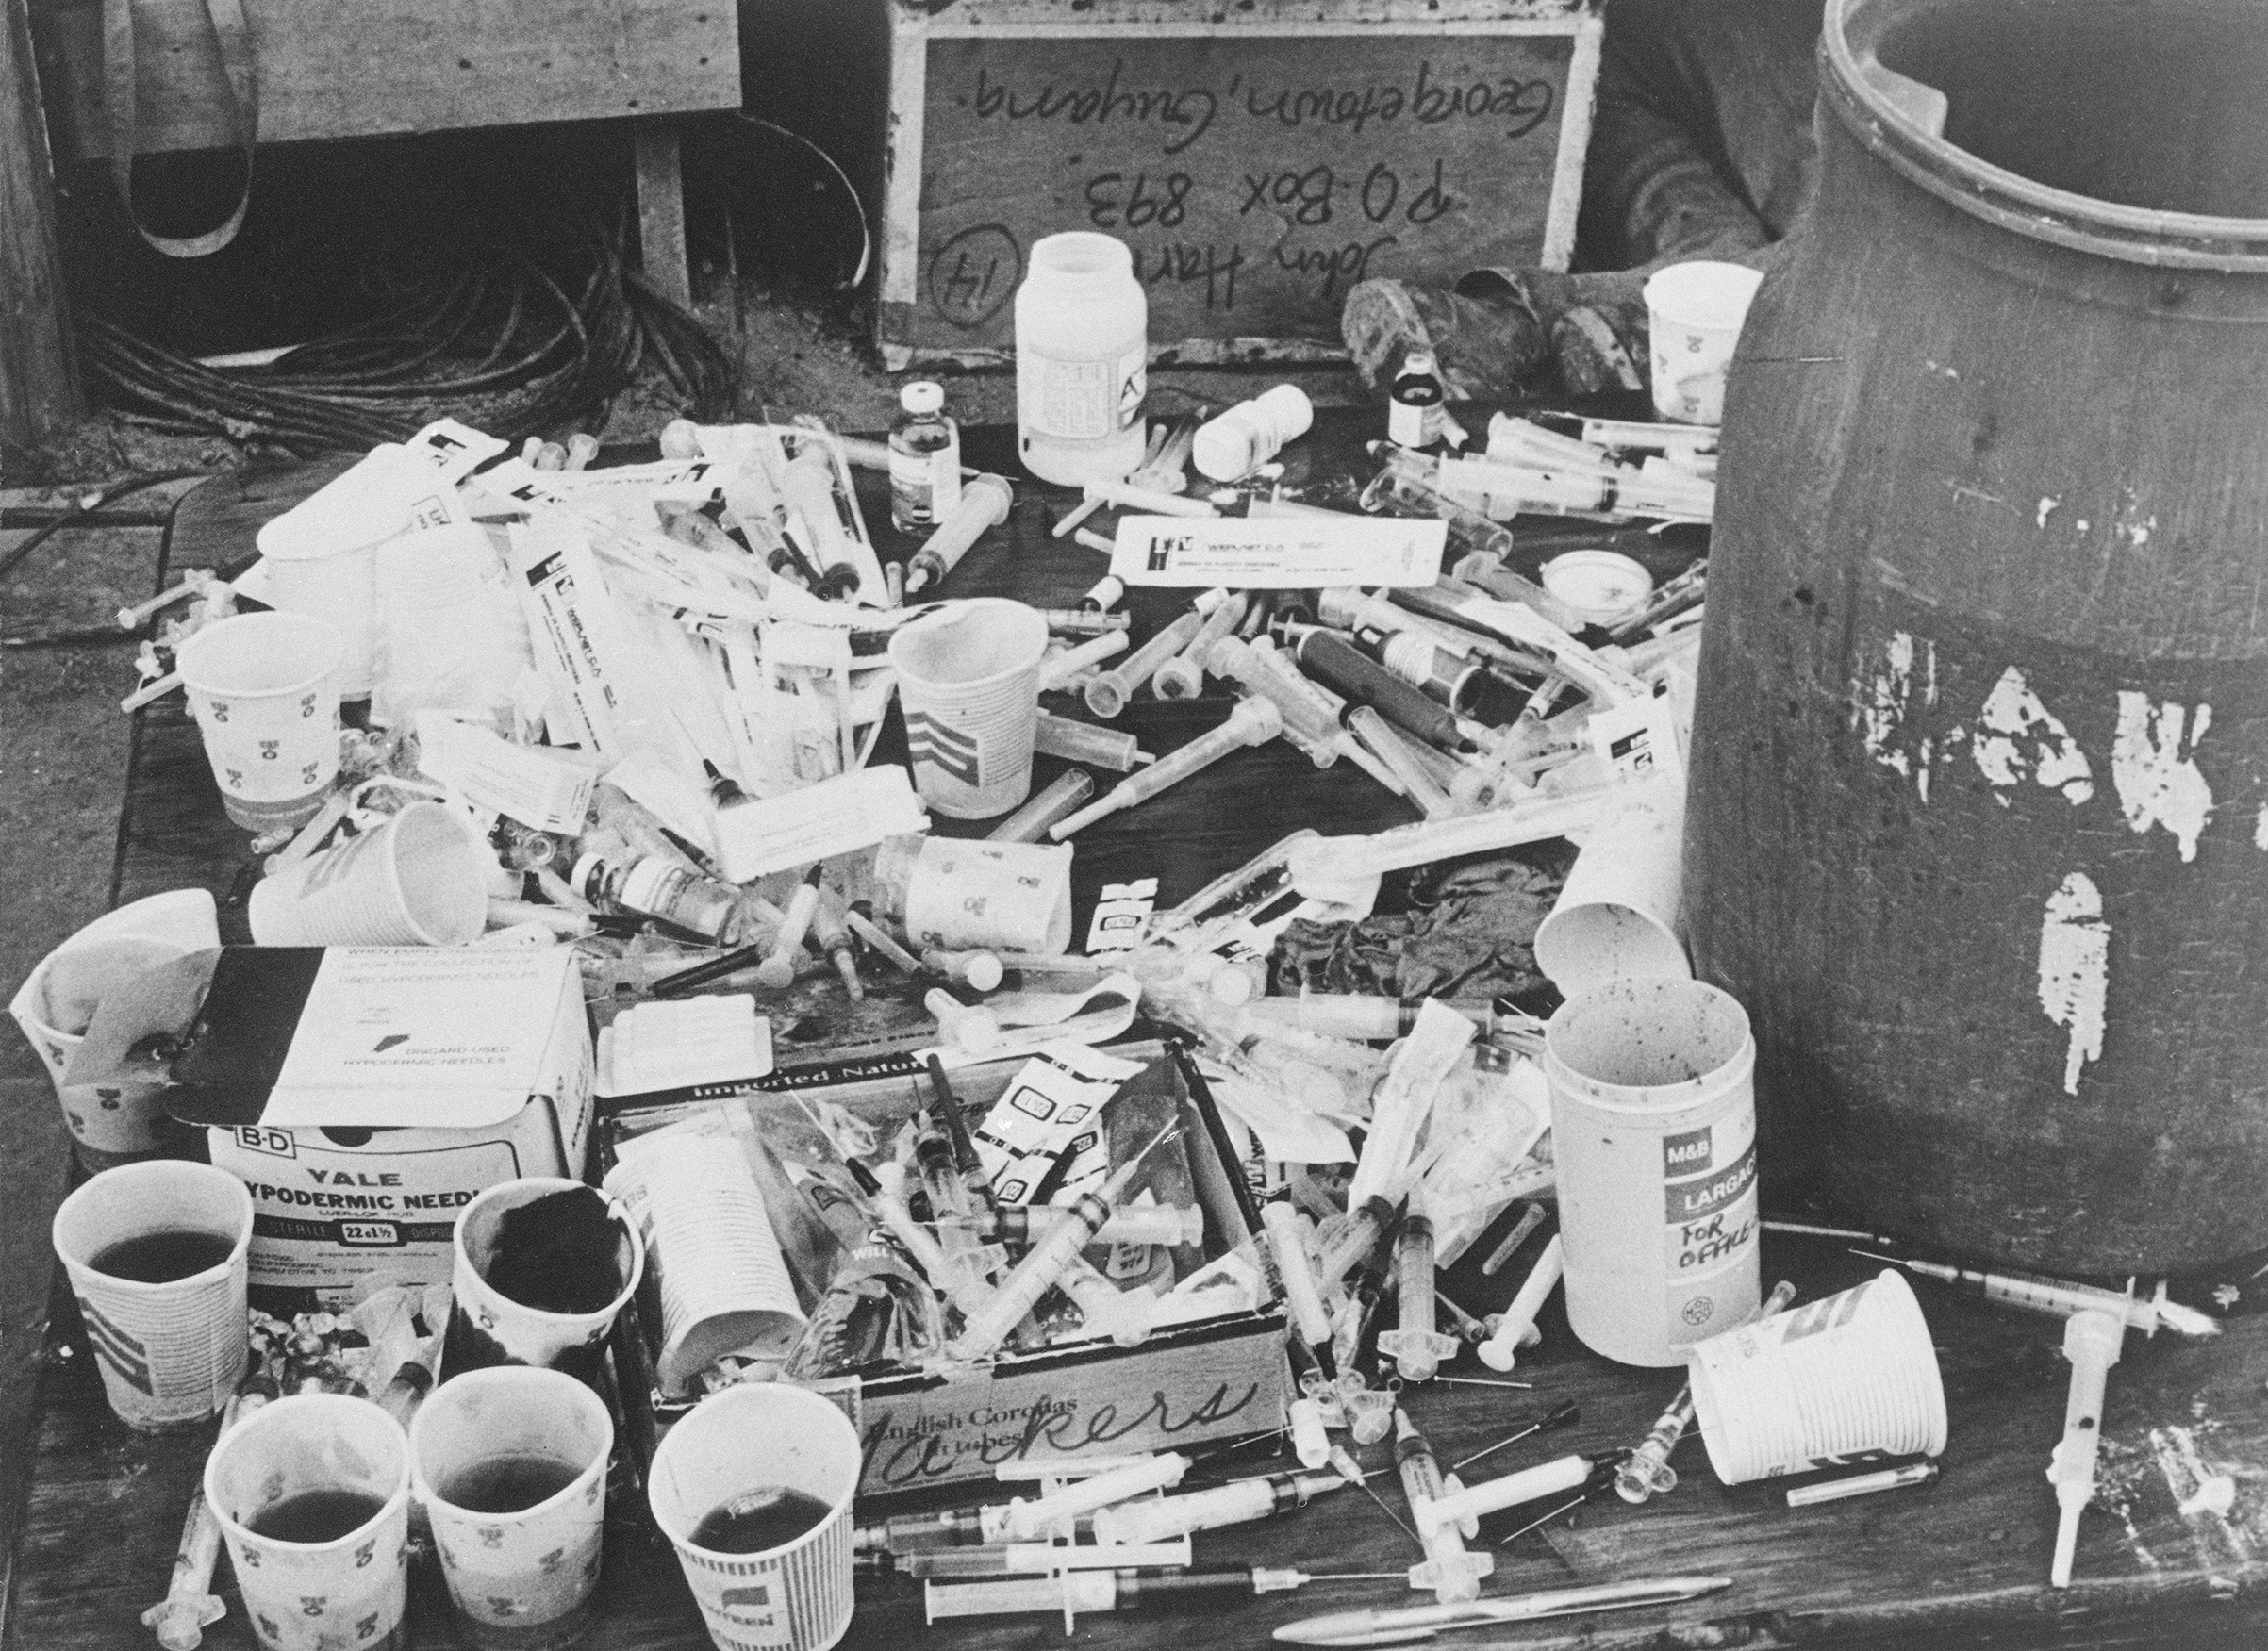 A pile of paper cups with cyanide-laced fruit punch, and a pile of hypodermic syringes, found at Jonestown by Guyanese officials. (Bettmann Archive)